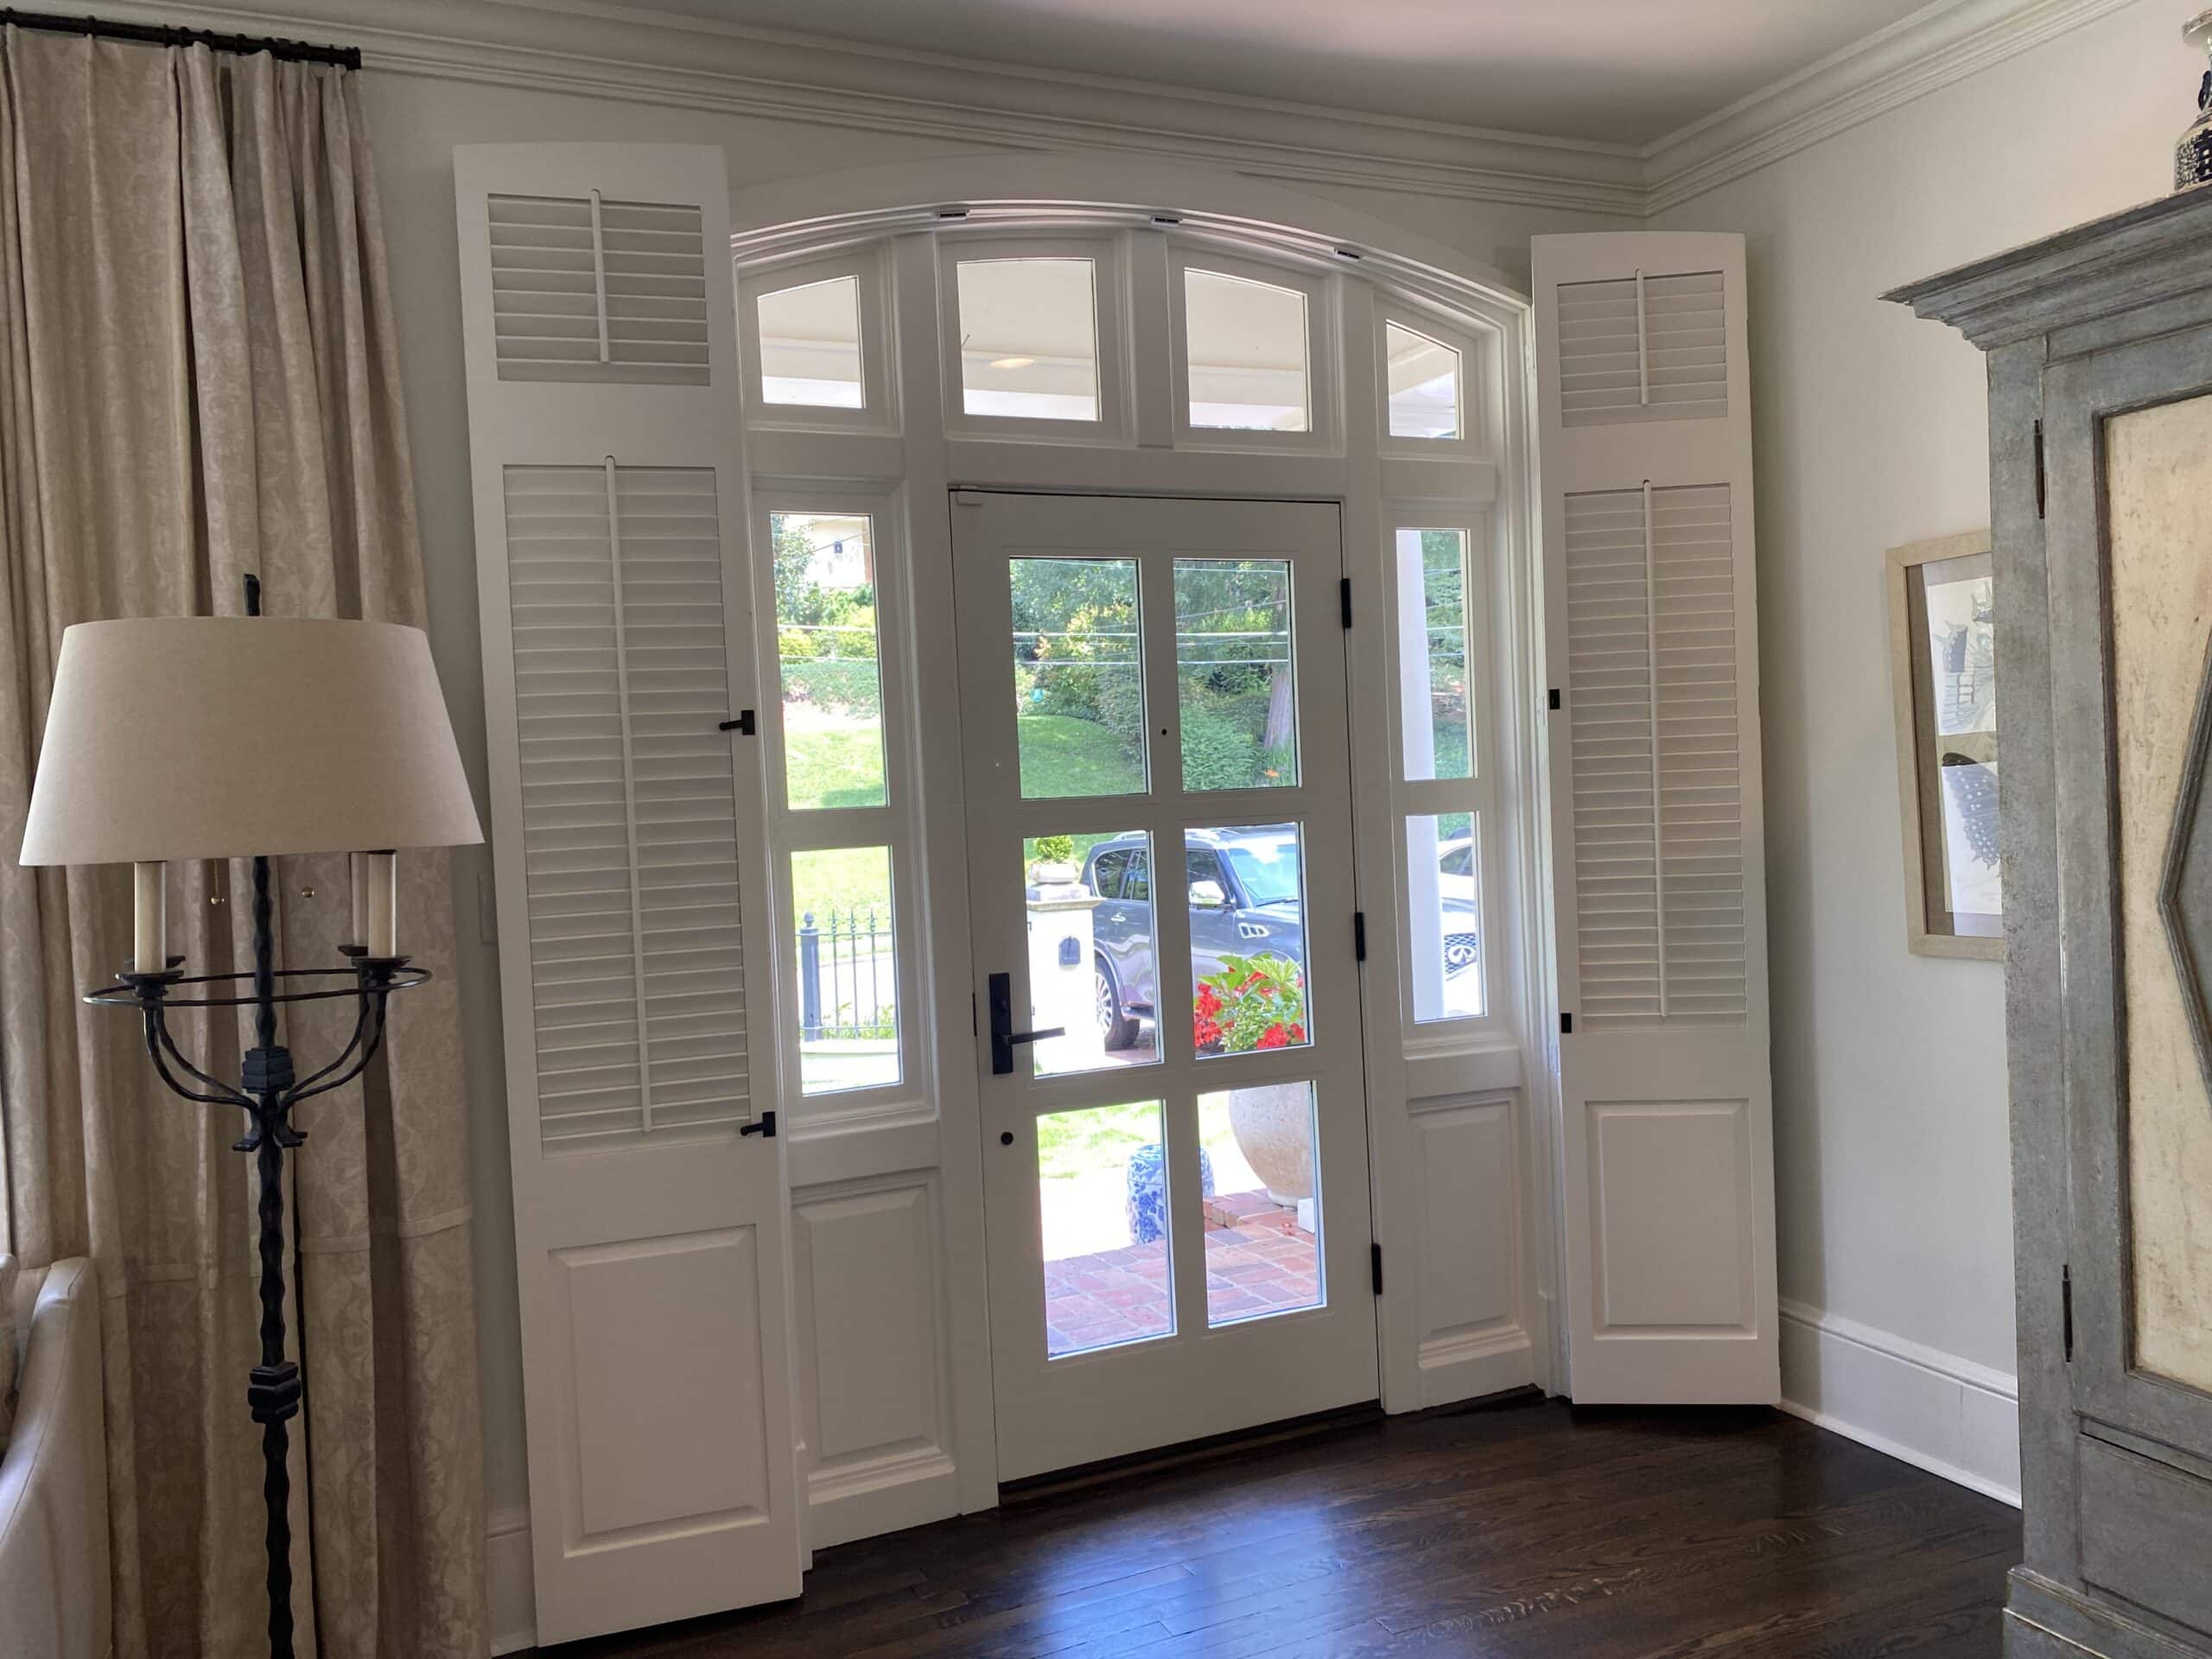 Arched entryway with functional small louver shutters